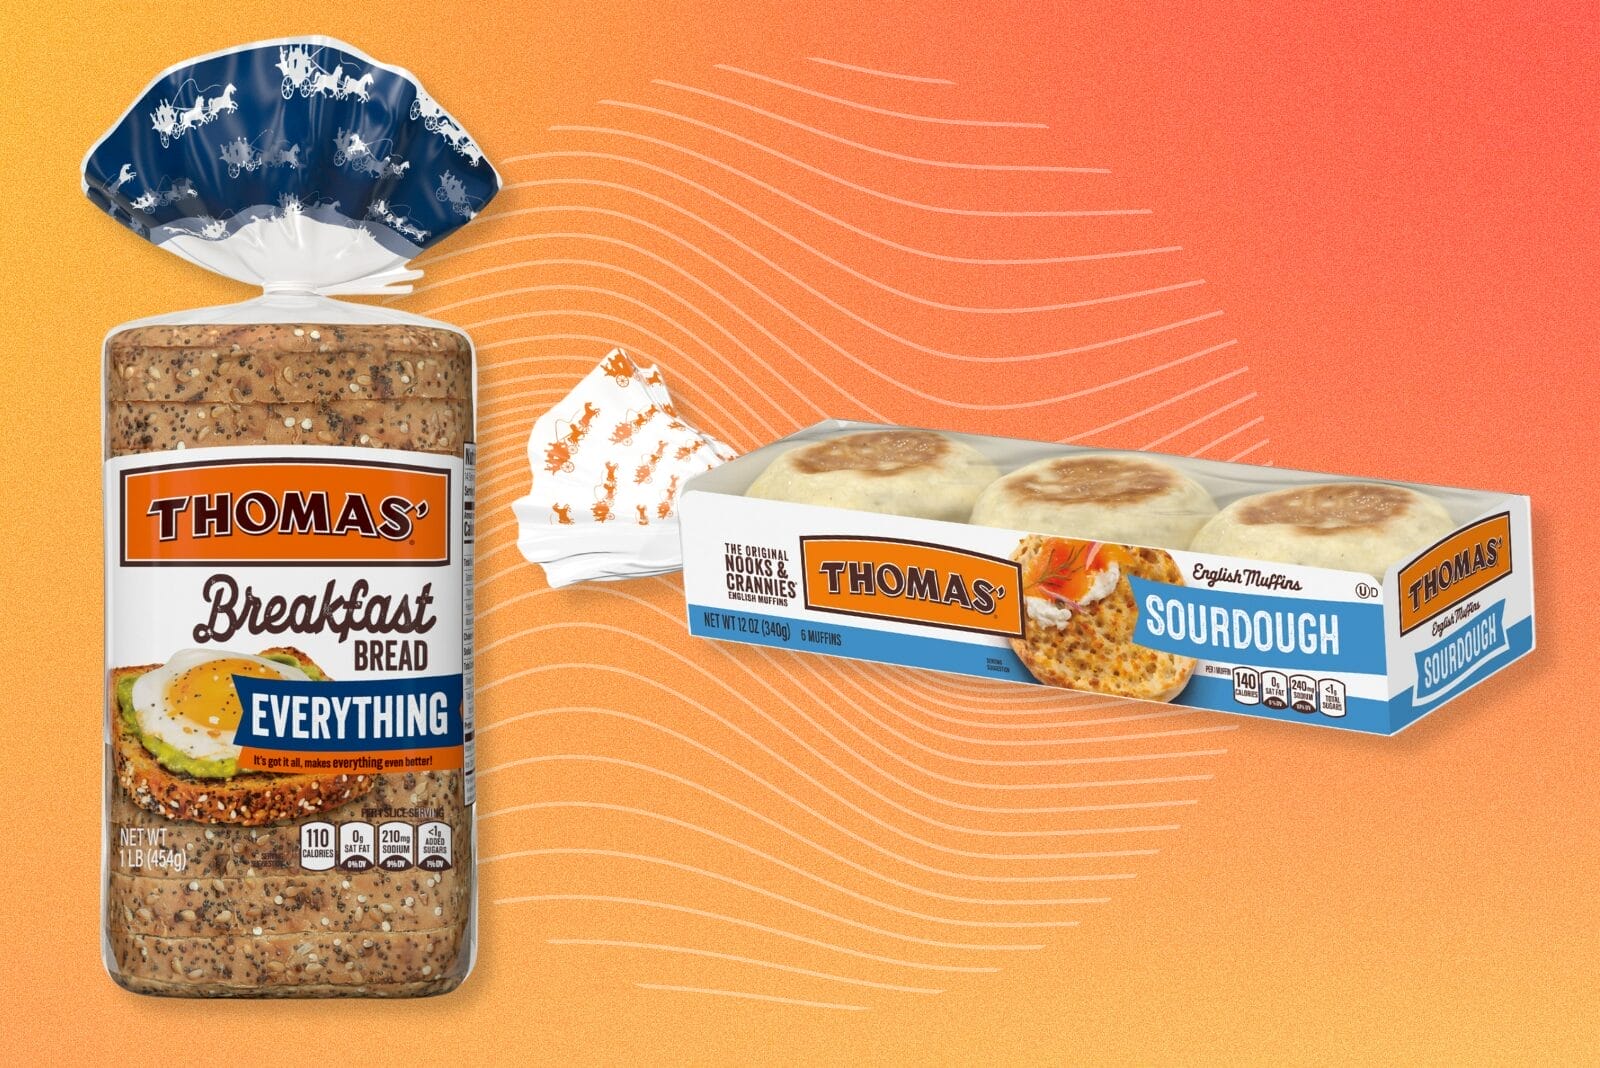 Package of Thomas' Sourdough English Muffins and new Everything Breakfast Bread